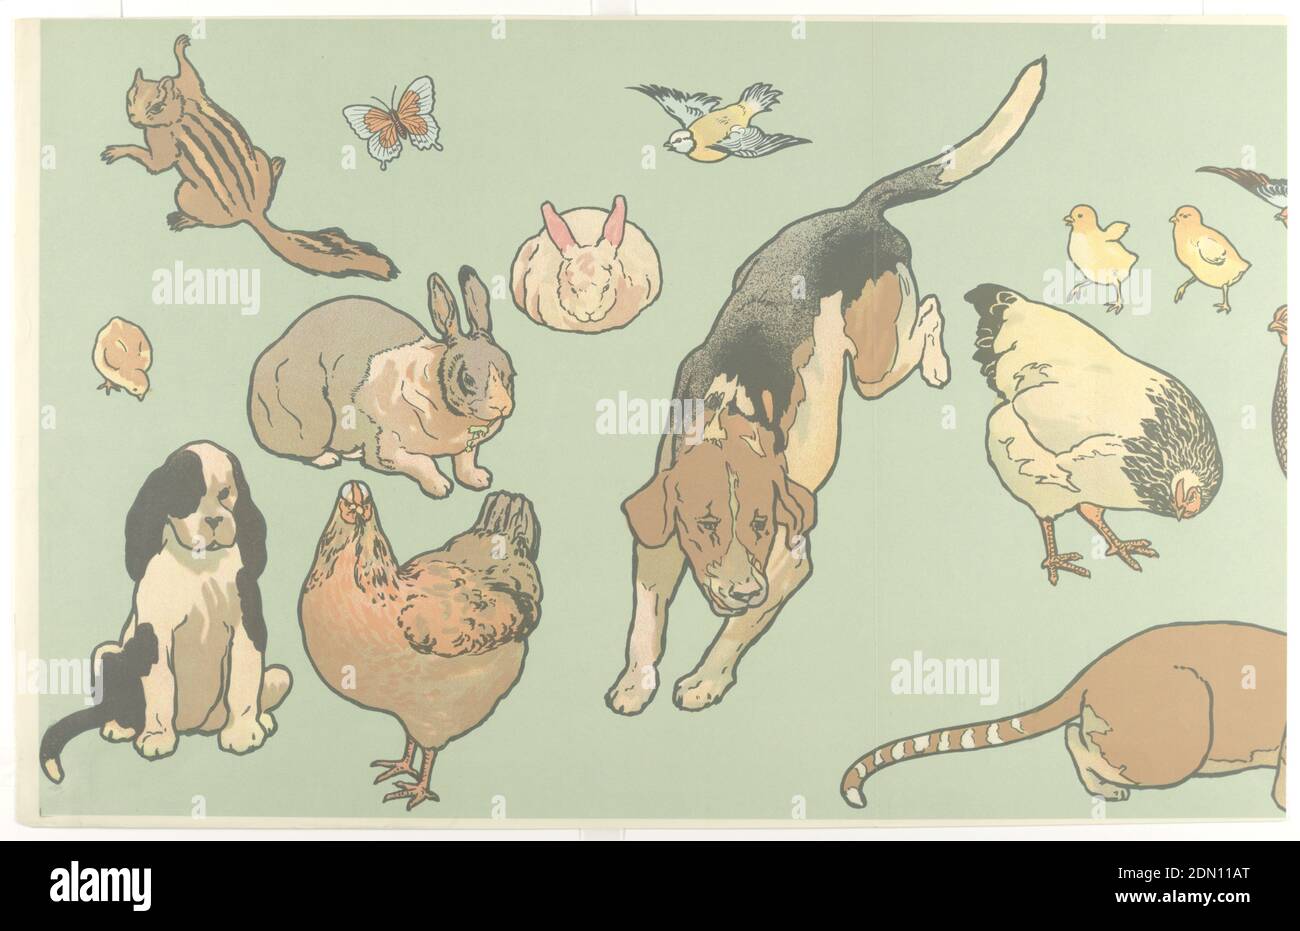 Kindergarten Cut-Outs, The Schmitz-Horning Co., Cleveland, Ohio, 1905 - 1960, Chromolithograph on paper, Animals outlined with thick black line. Farm and domestic animals, including dogs, chickens, rabbits, bird and chipmunk or squirrel. Printed in colors on a green ground. The paper could be applied as is forming a frieze or the animals could be cut out and pasted to the wall or pinned to a fabric wallcoverings., Cleveland, Ohio, USA, 1906, Wallcoverings, Decorative panels, Decorative panels Stock Photo